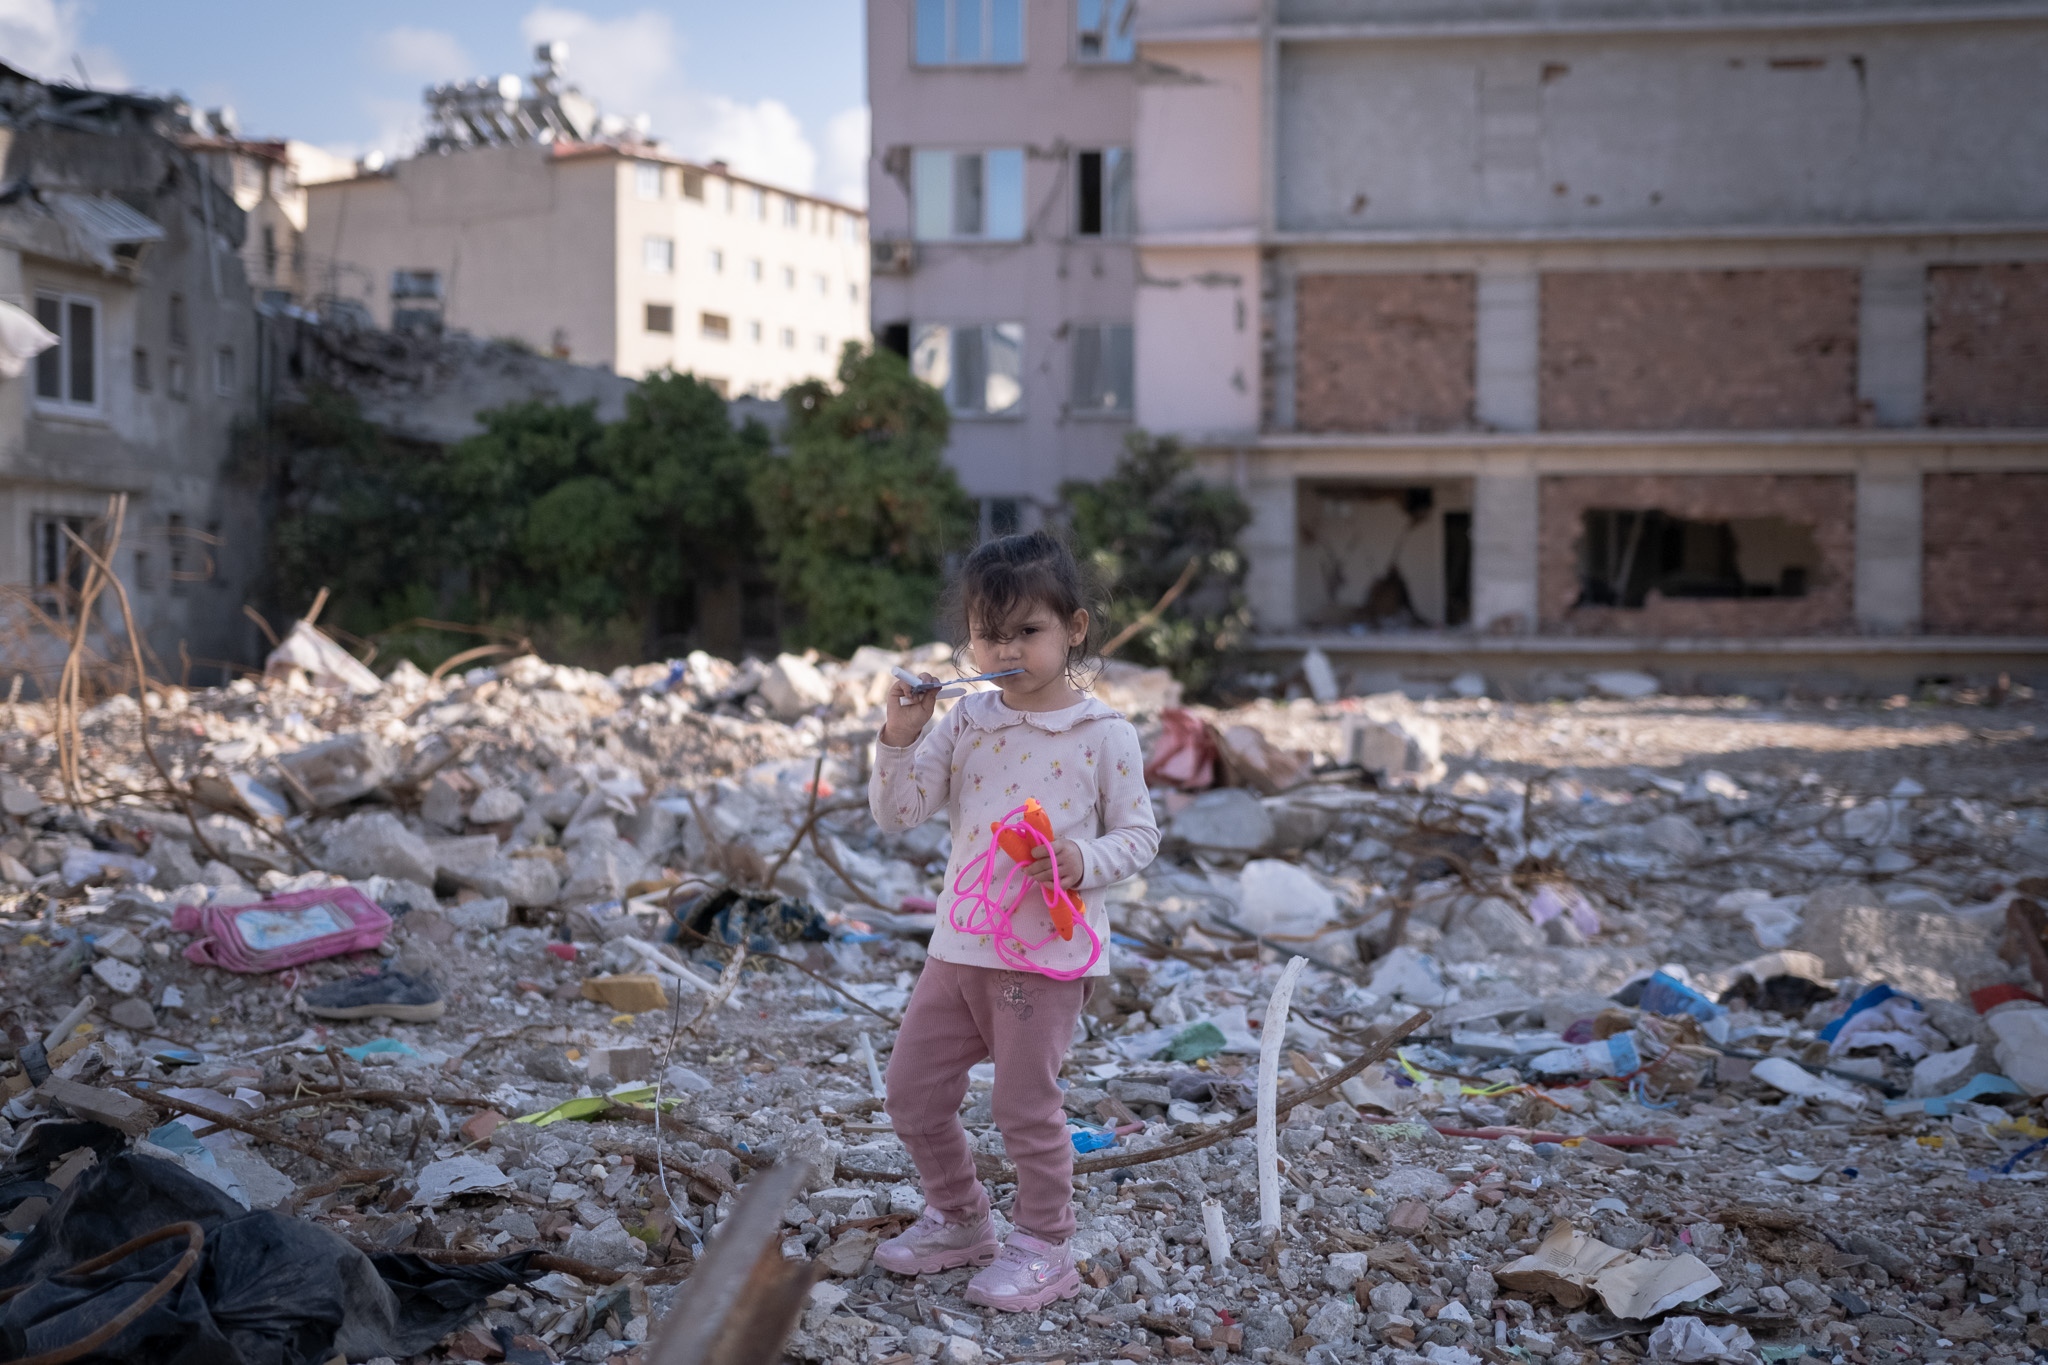 &nbsp;A girl walks around the rubble looking for toys...